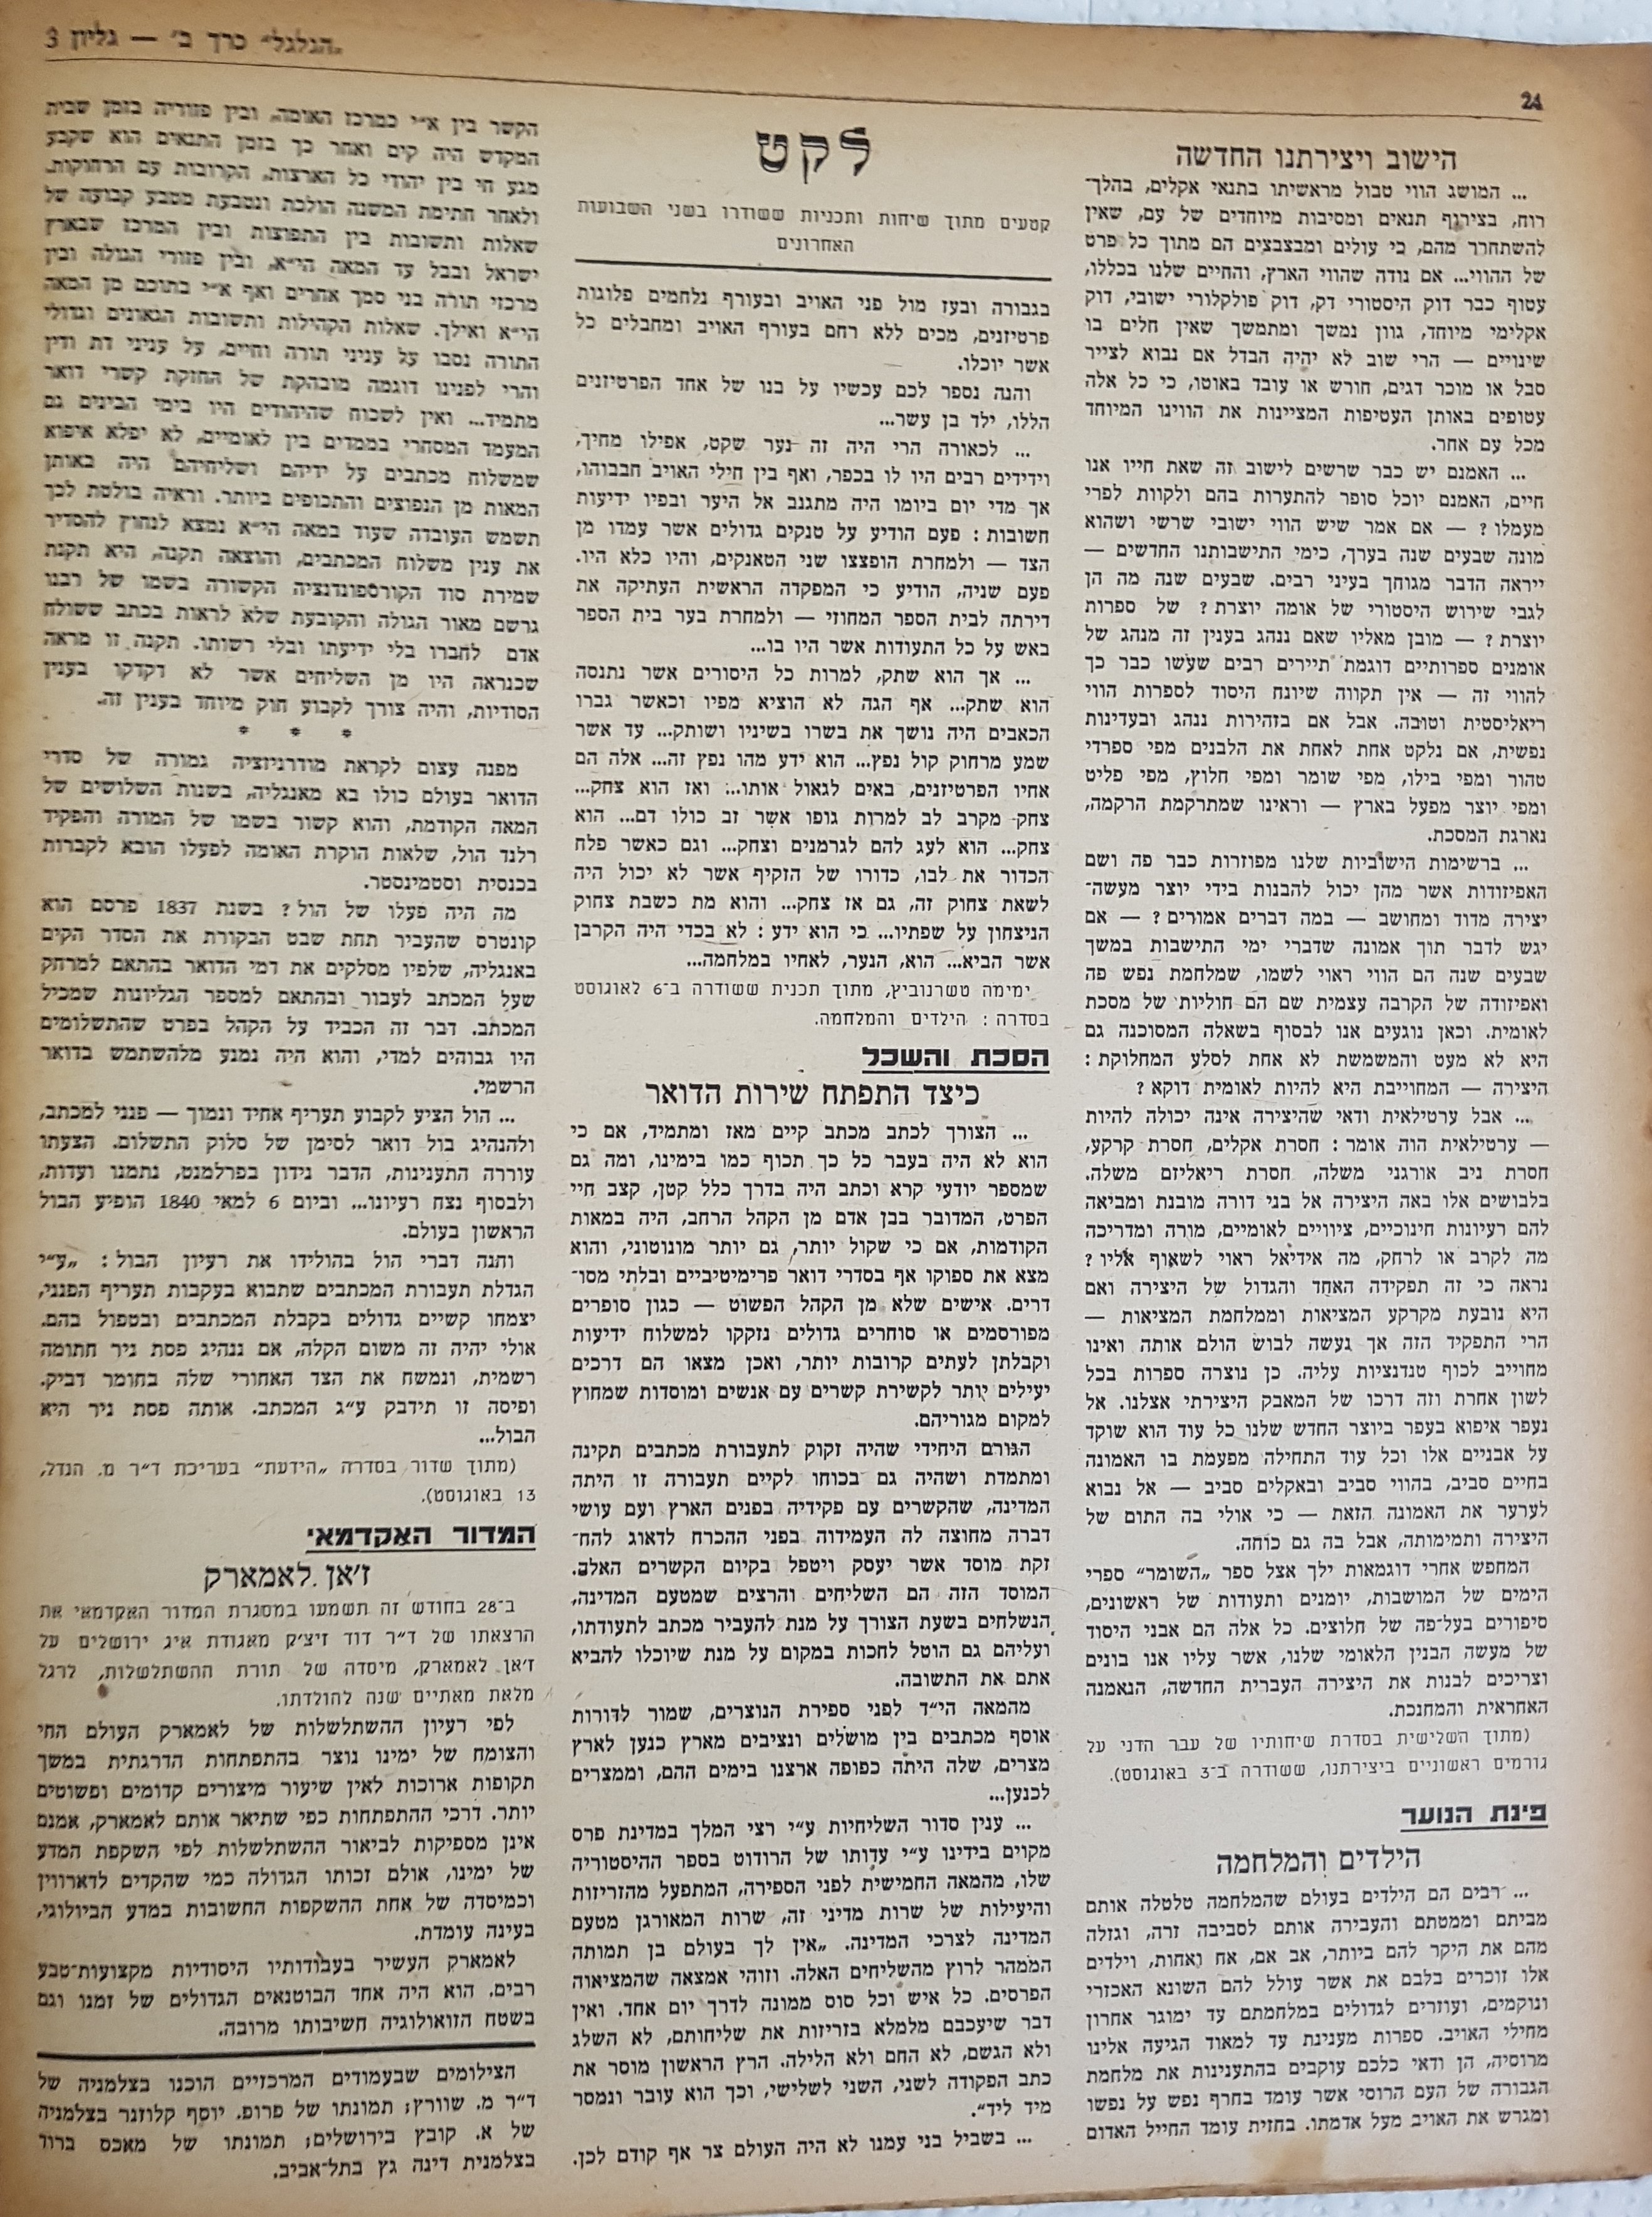   Photo: page 24